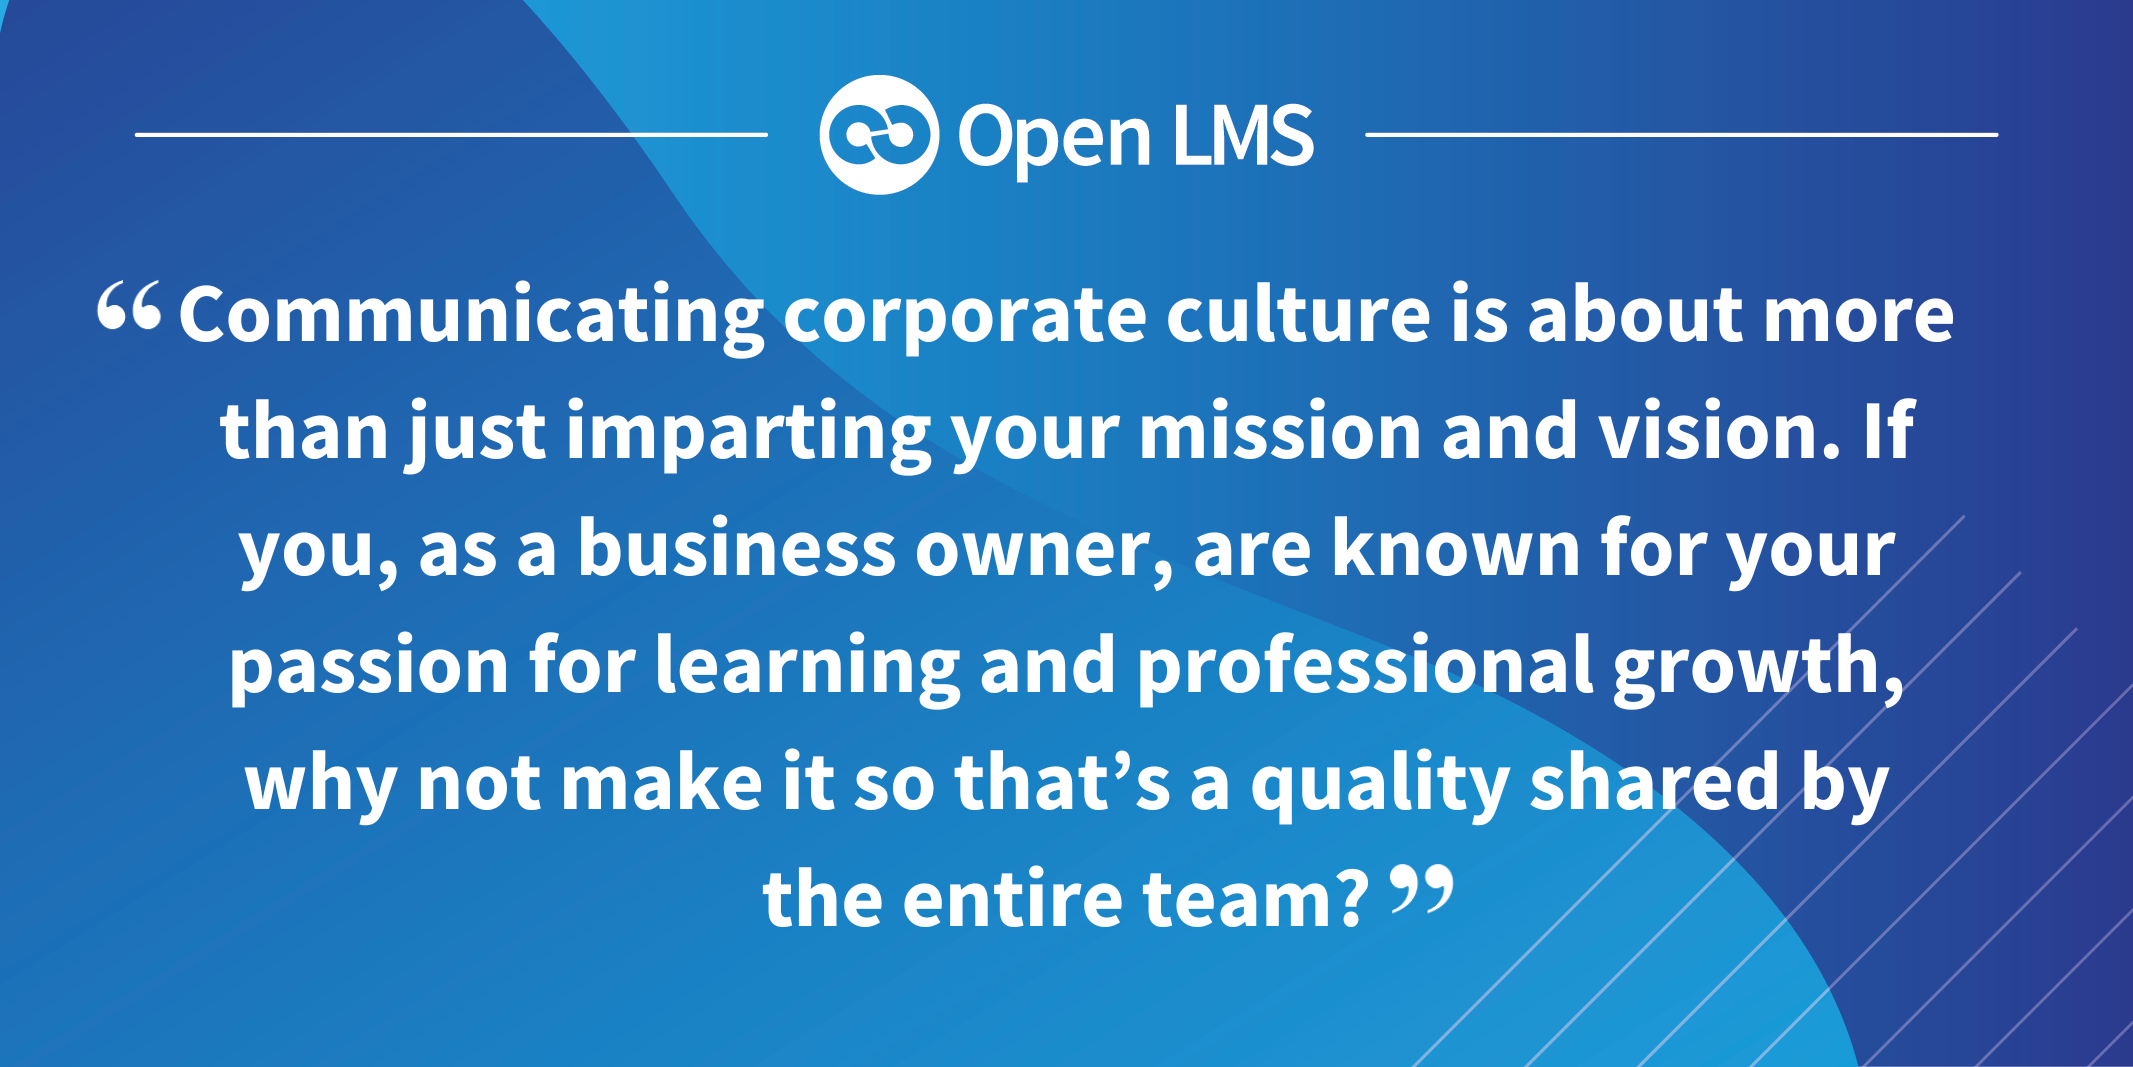 “Communicating corporate culture is about more than just imparting your mission and vision. If you, as a business owner, are known for your passion for learning and professional growth, why not make it so that’s a quality shared by the entire team?”